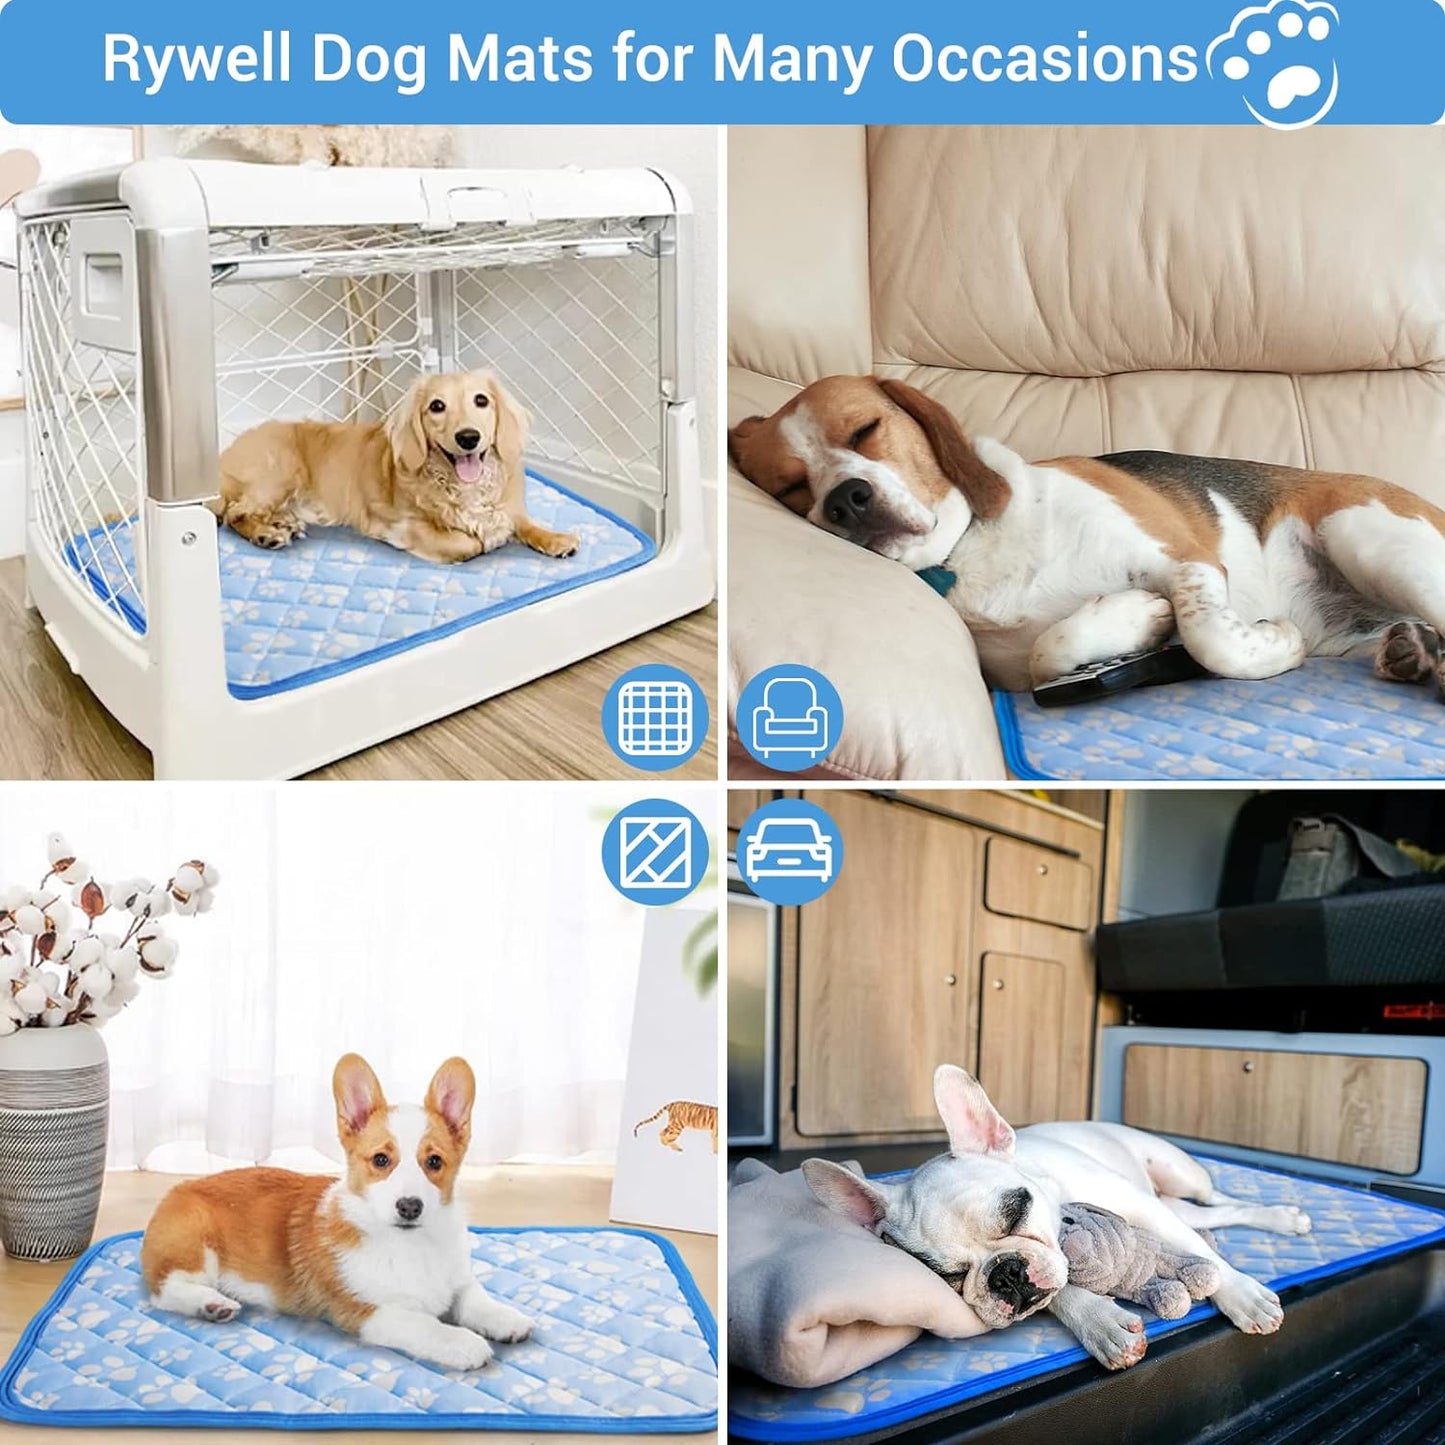 Chill Cooling Mat Pad for Dog Large 70x90CM